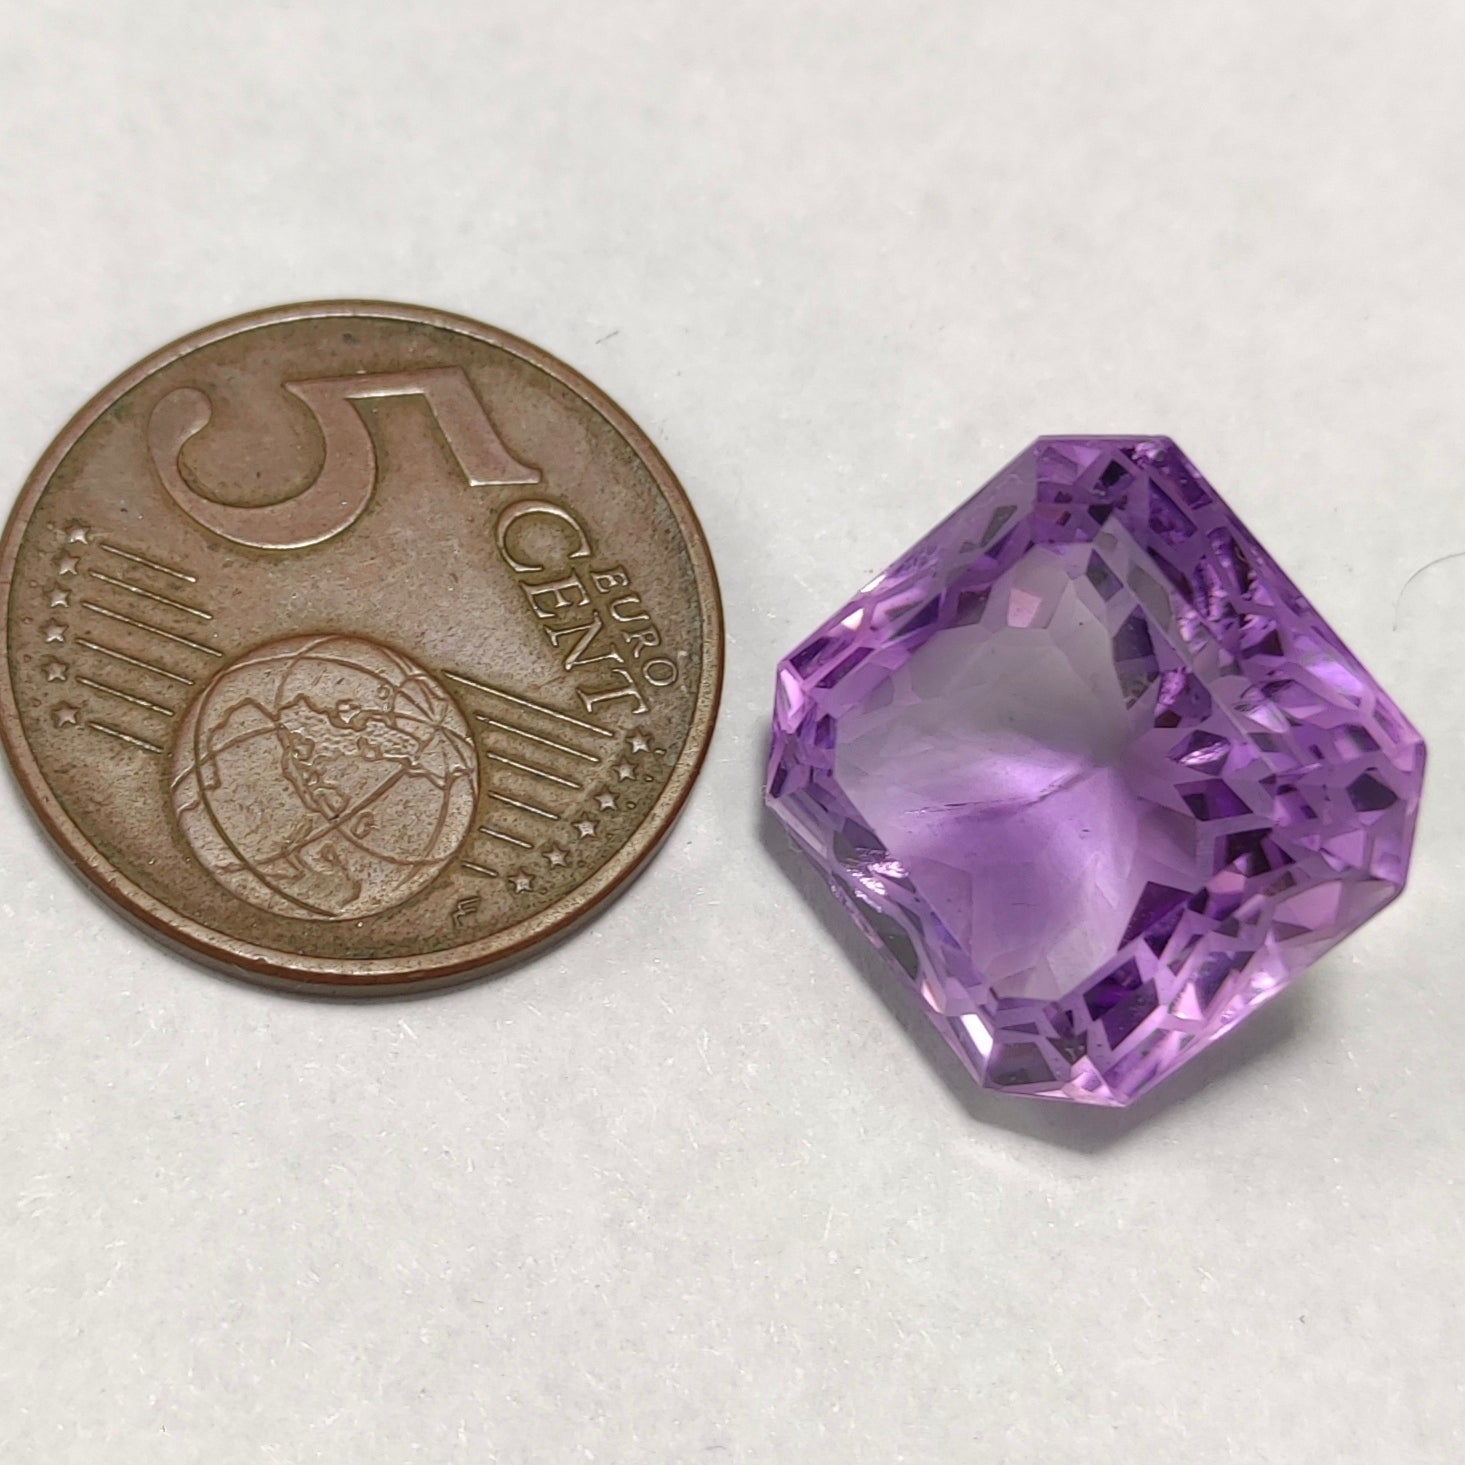 ARSAA GEMS AND MINERALSNatural fine quality beautiful 17.5 carats purple color clear faceted amethyst gem - Premium  from ARSAA GEMS AND MINERALS - Just $35! Shop now at ARSAA GEMS AND MINERALS